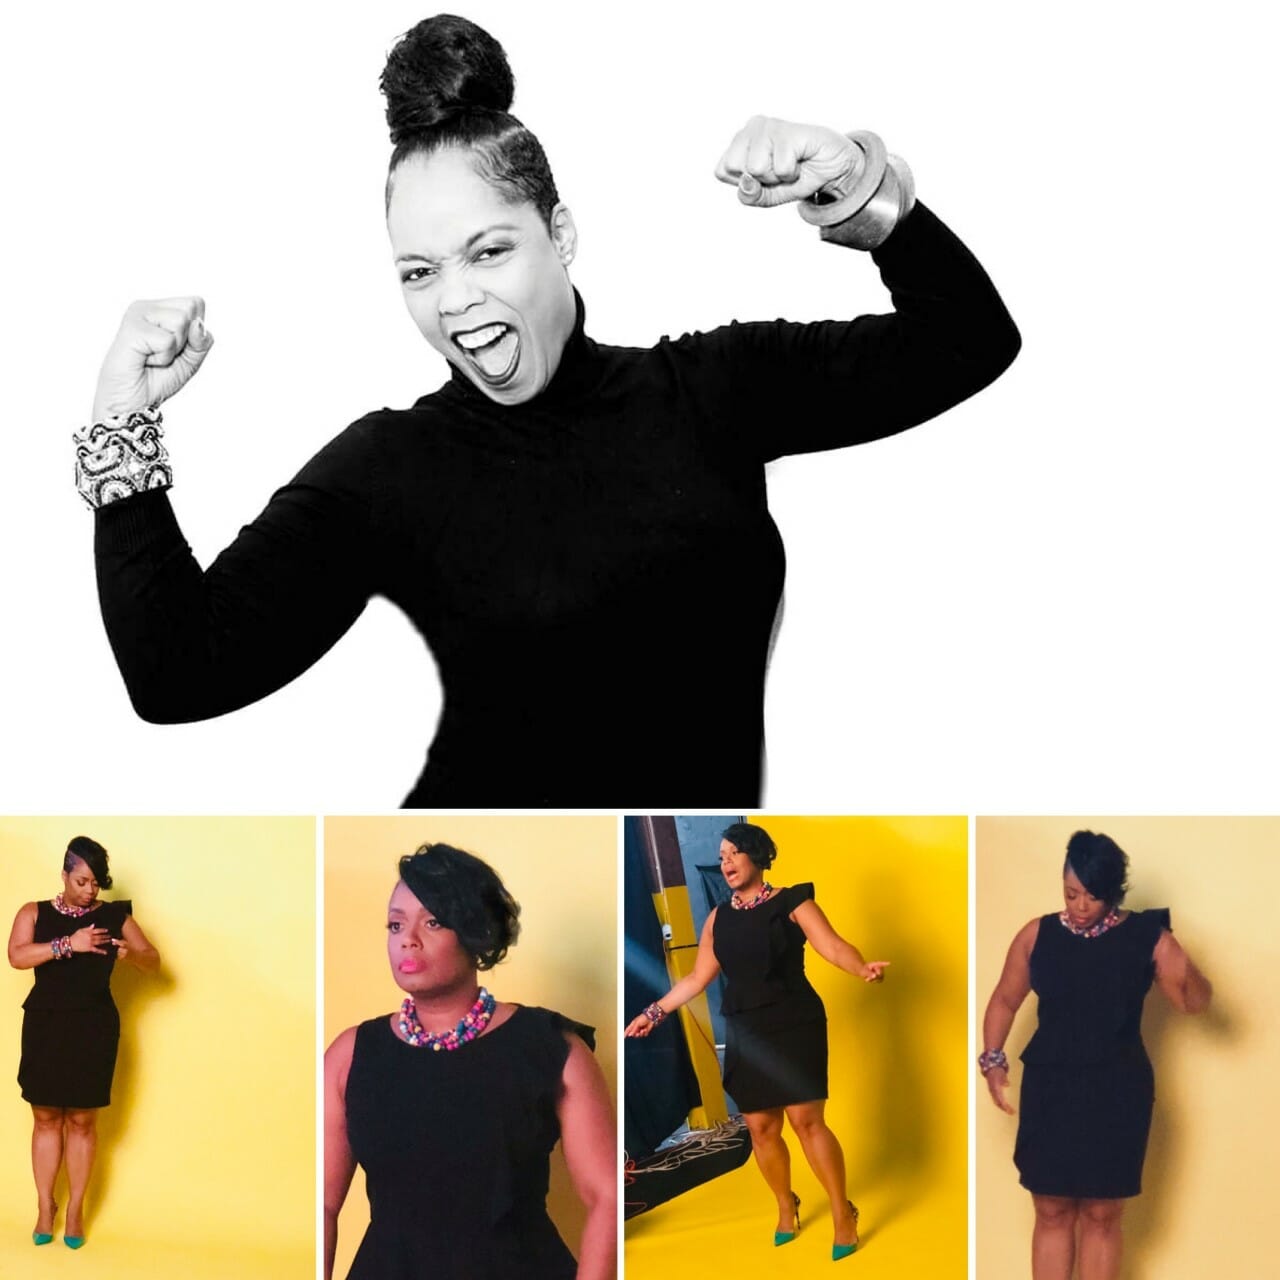 A black woman with a high bun in a black turtleneck top, flexing arms, and in a black sleeveless dress.